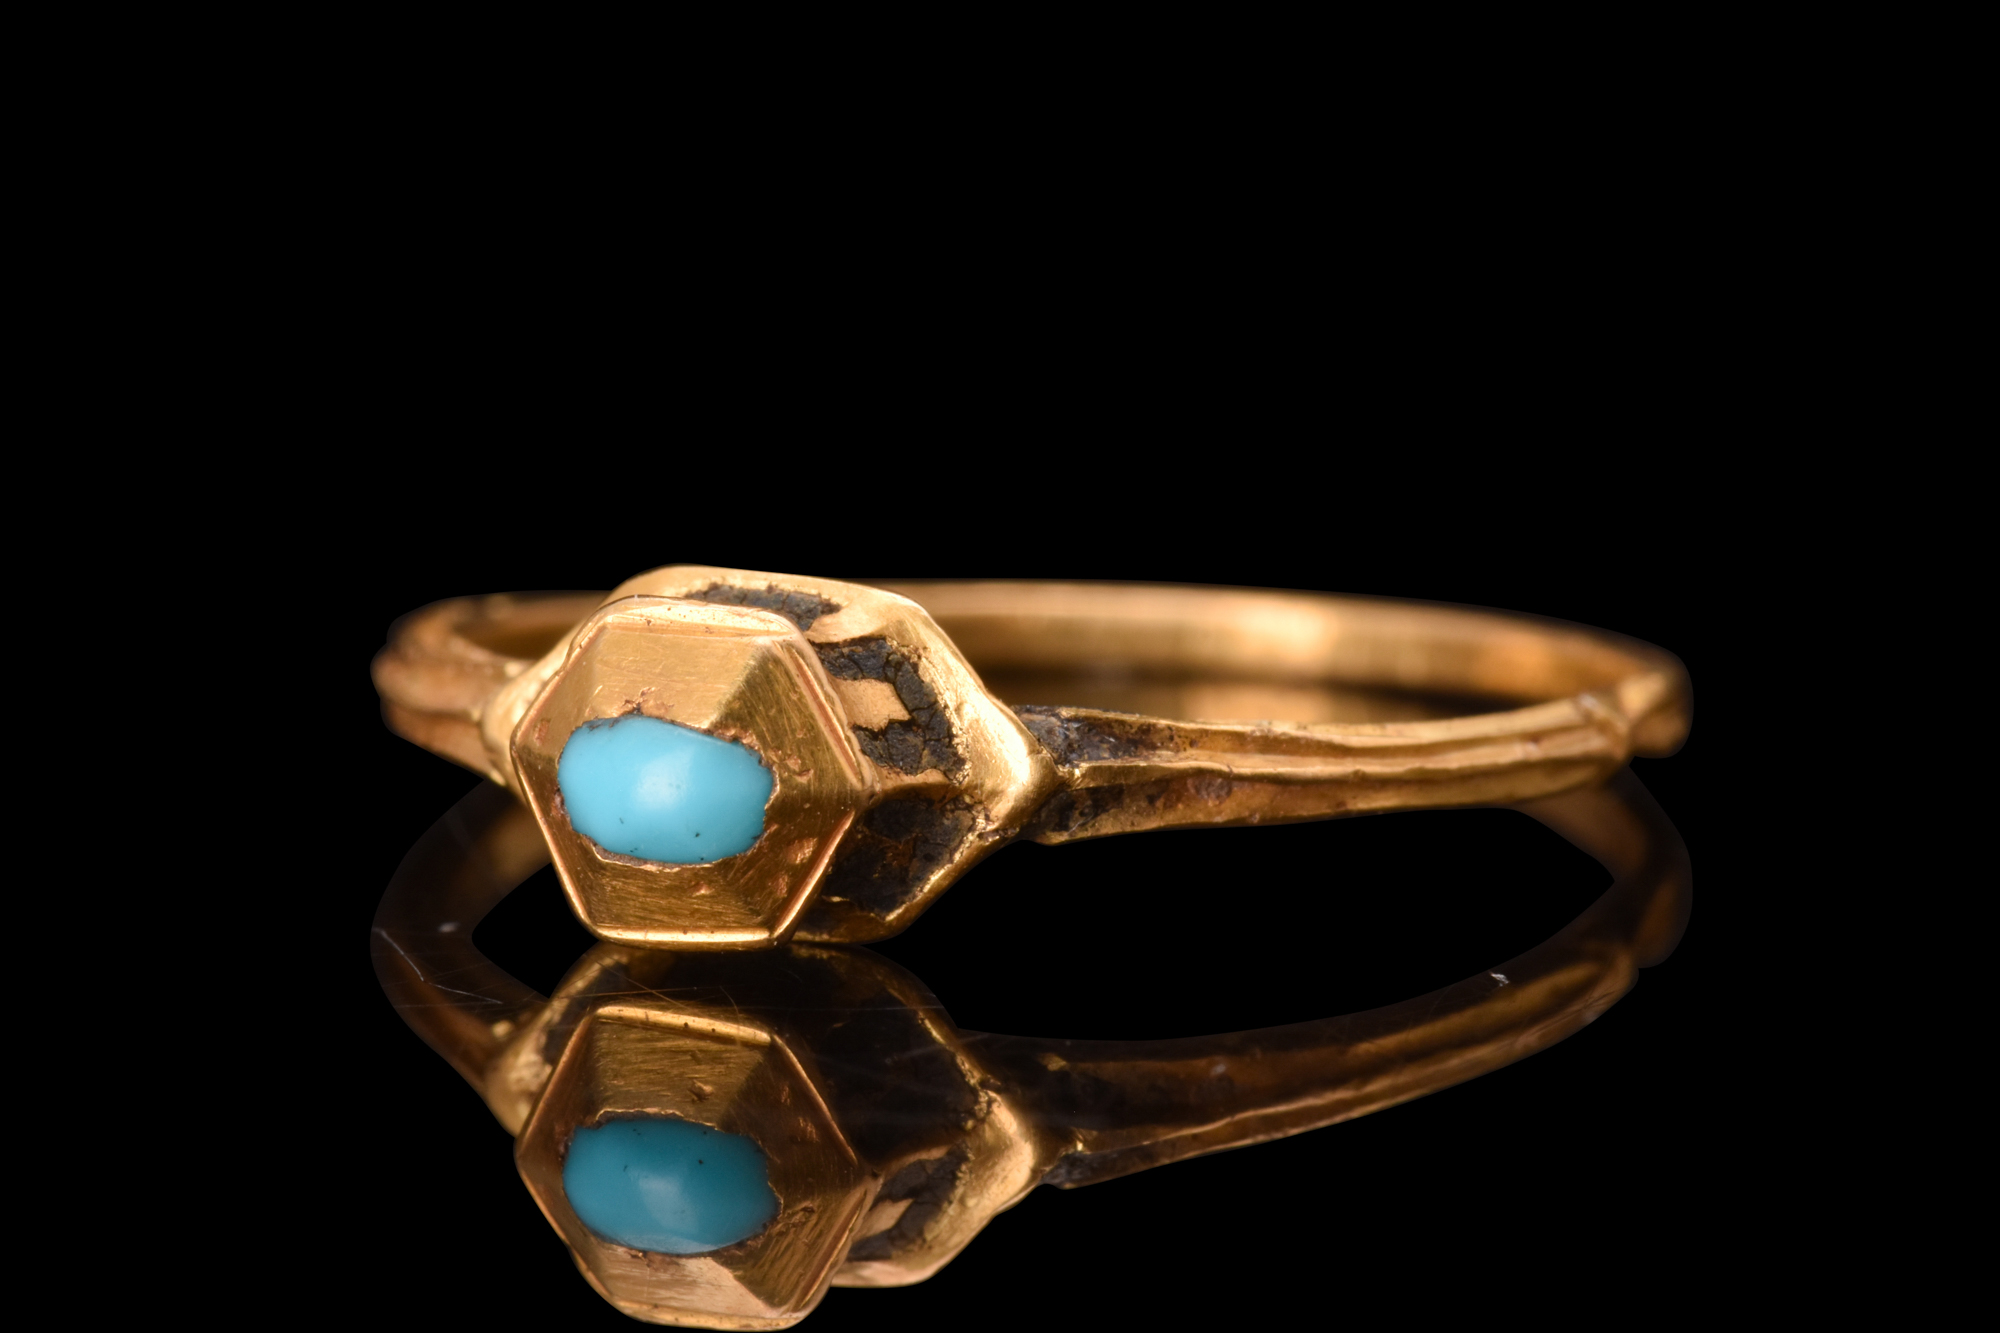 RENAISSANCE GOLD AND TURQUOISE RING - Image 2 of 6